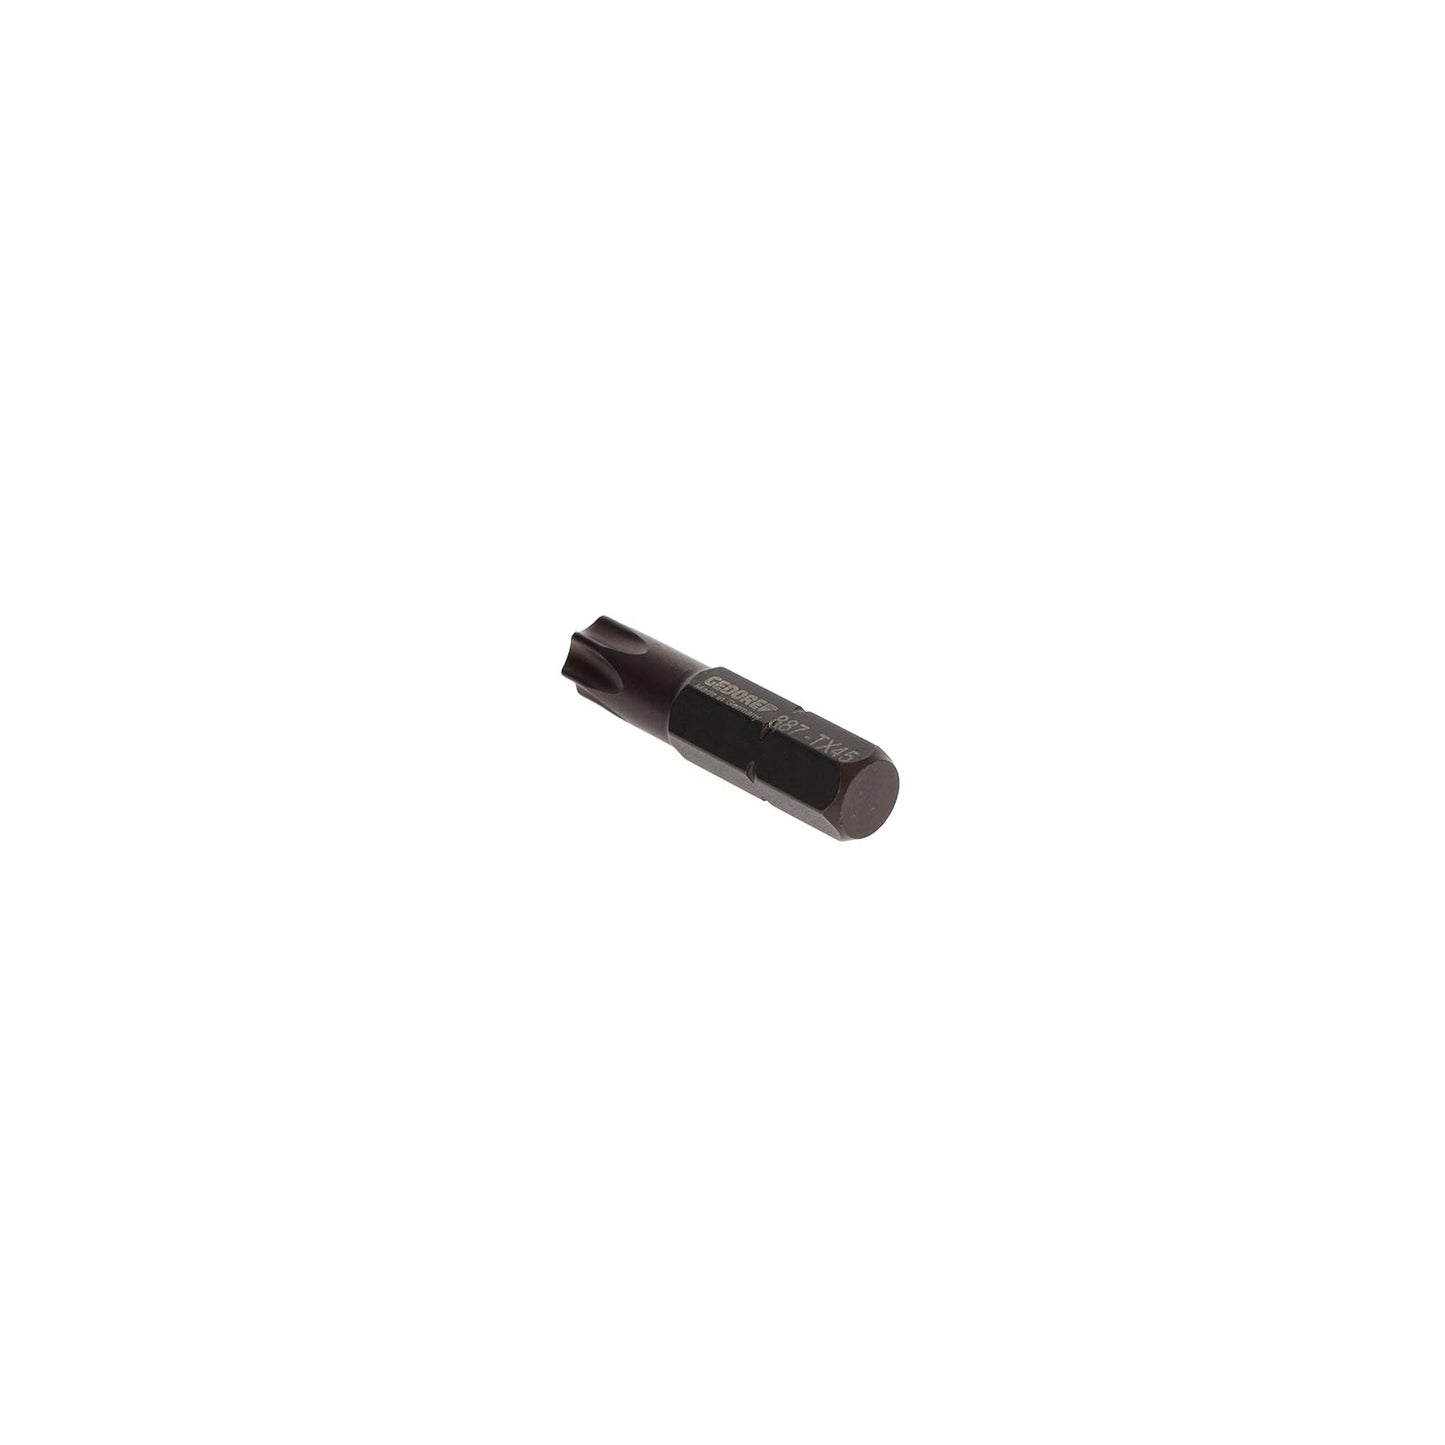 GEDORE 887 TX T45 - Embout TORX® 5/16", T45 (6571310)